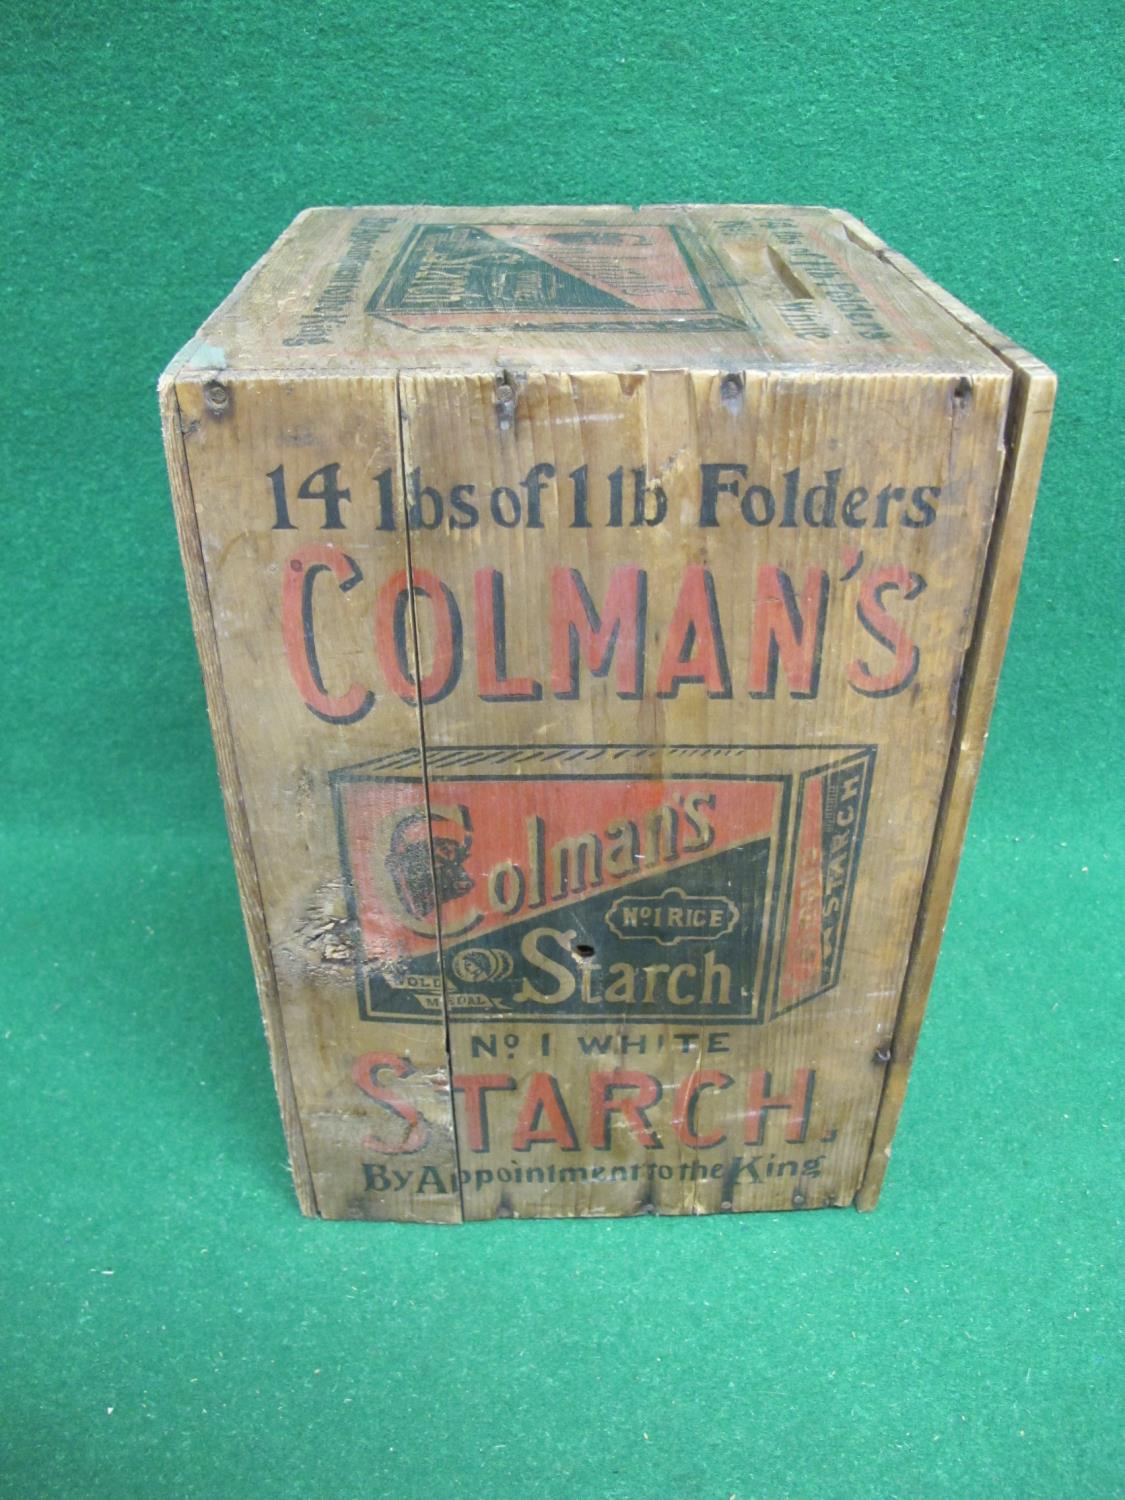 Theatrical non-opening, aged, wooden box printed on four sides for Colman's Starch 14lb of 1lb - Image 2 of 3